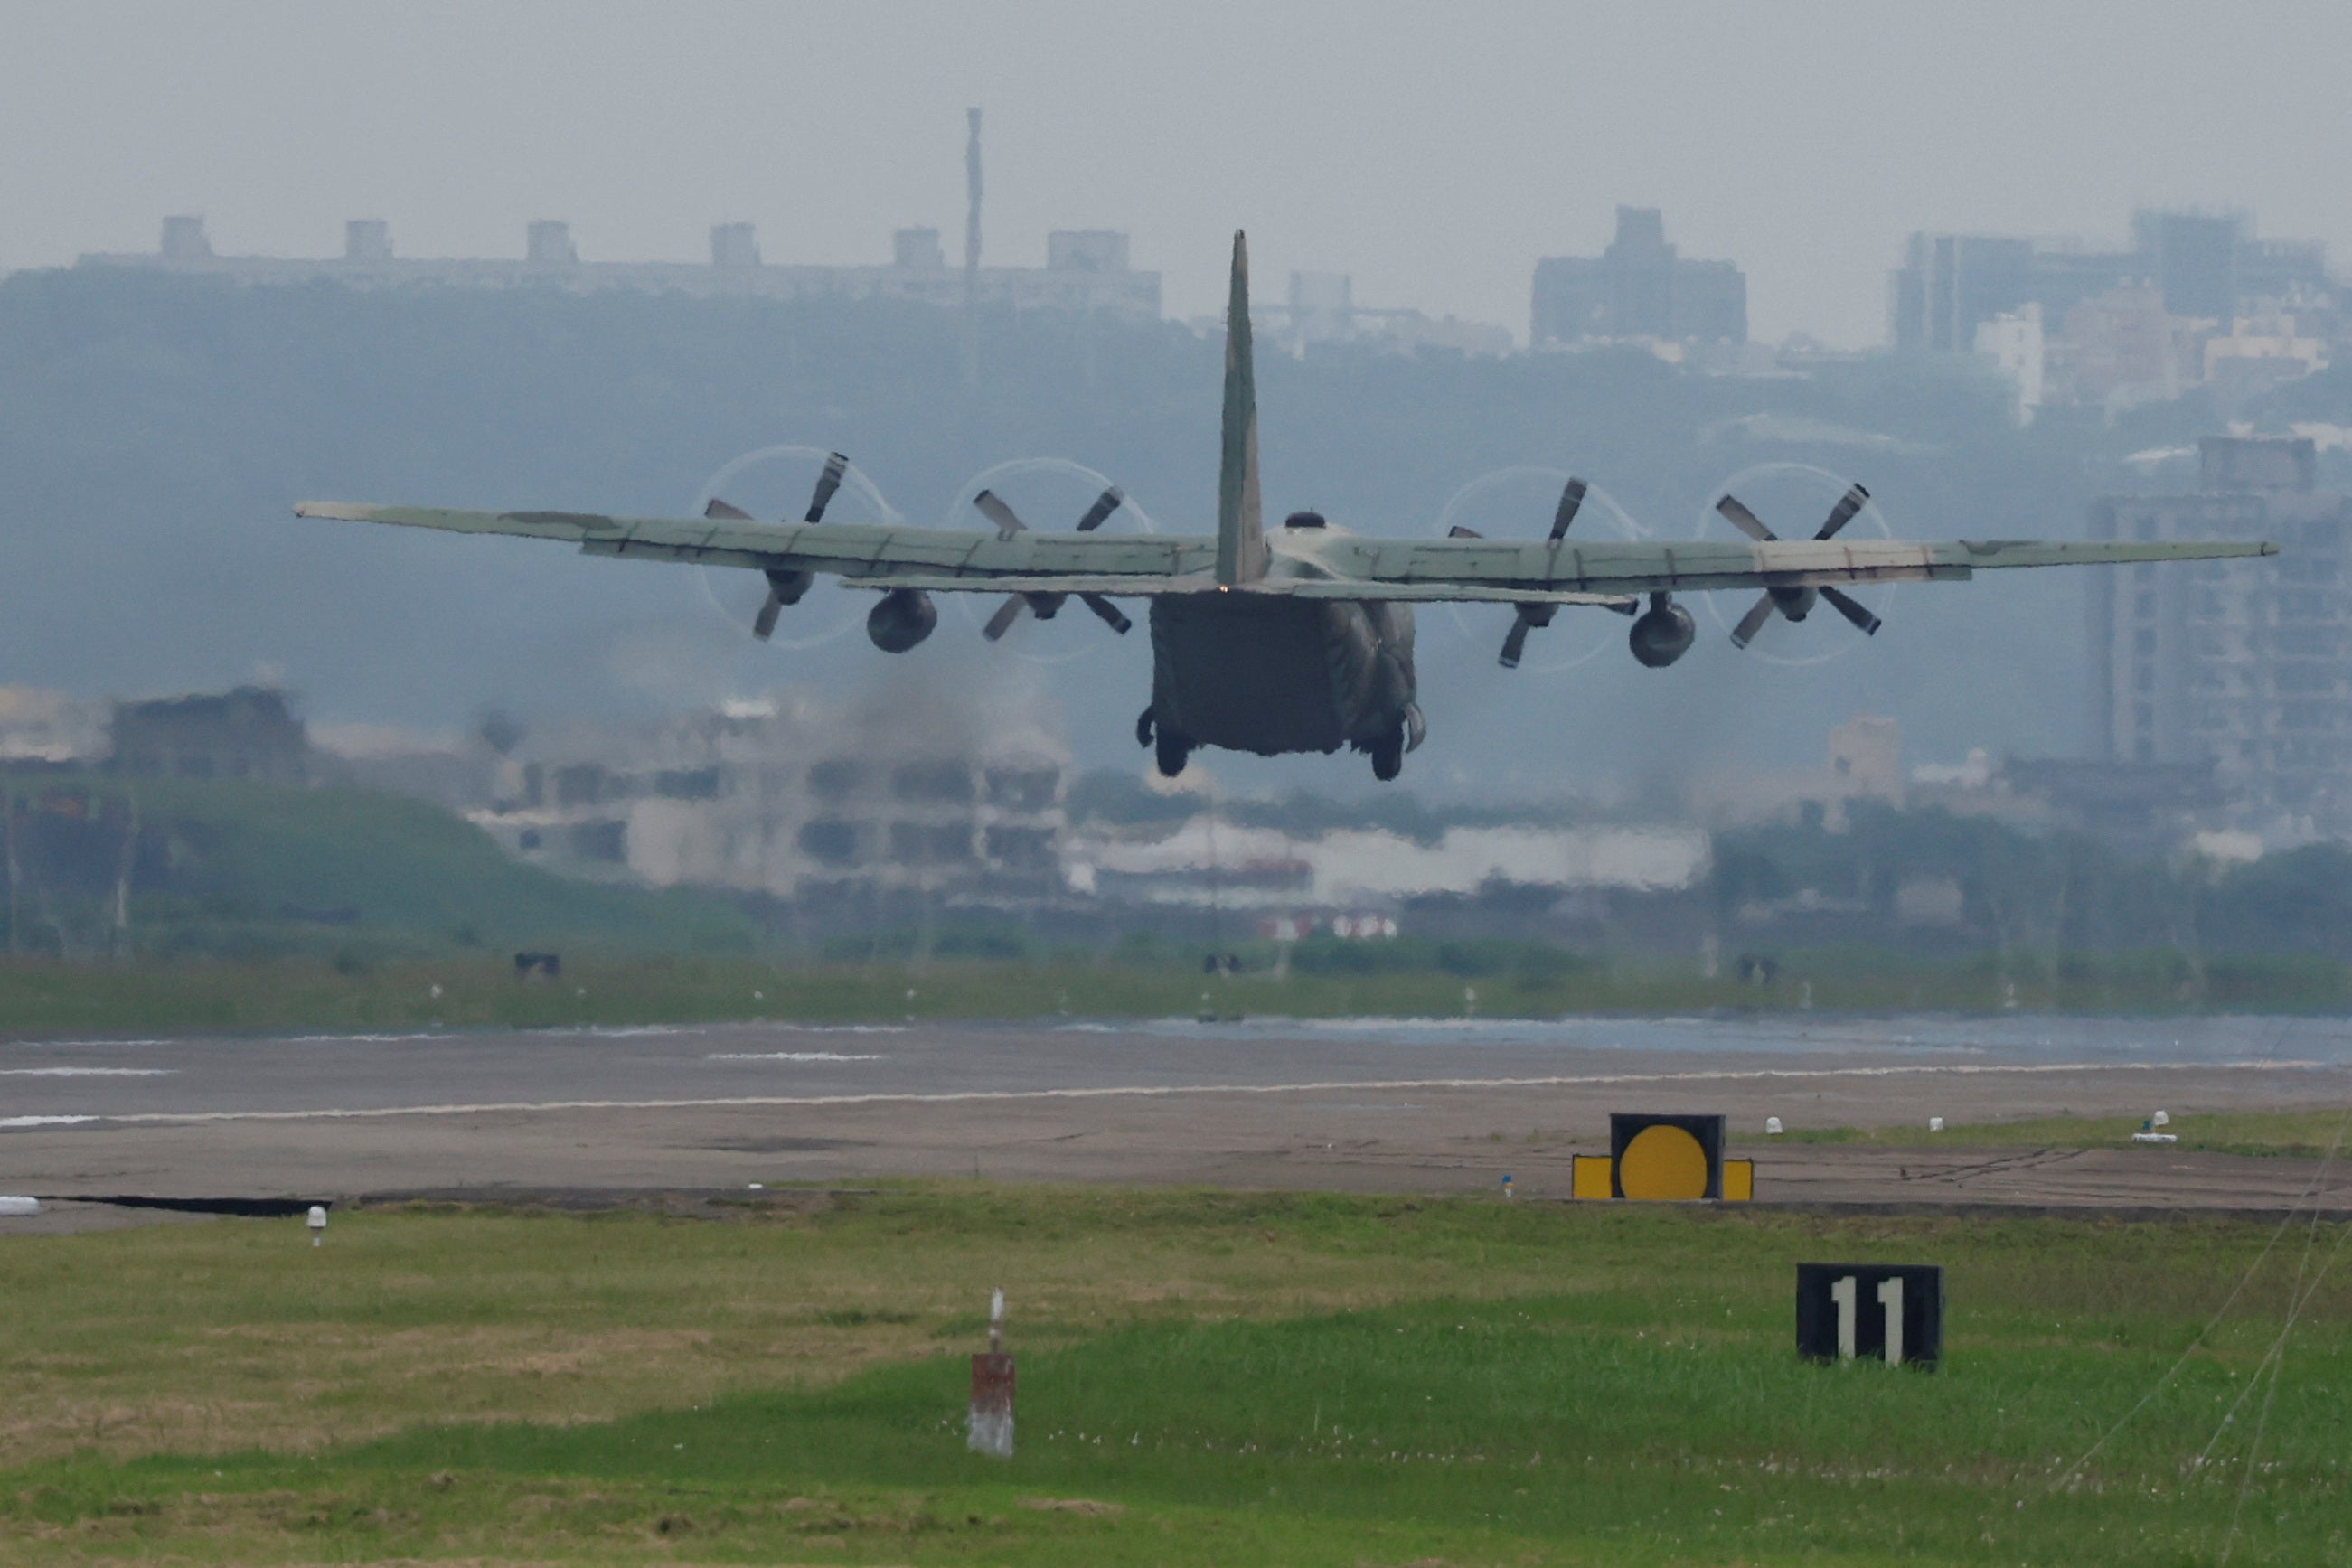 A Taiwanese air force C-130 takes off at Hsinchu